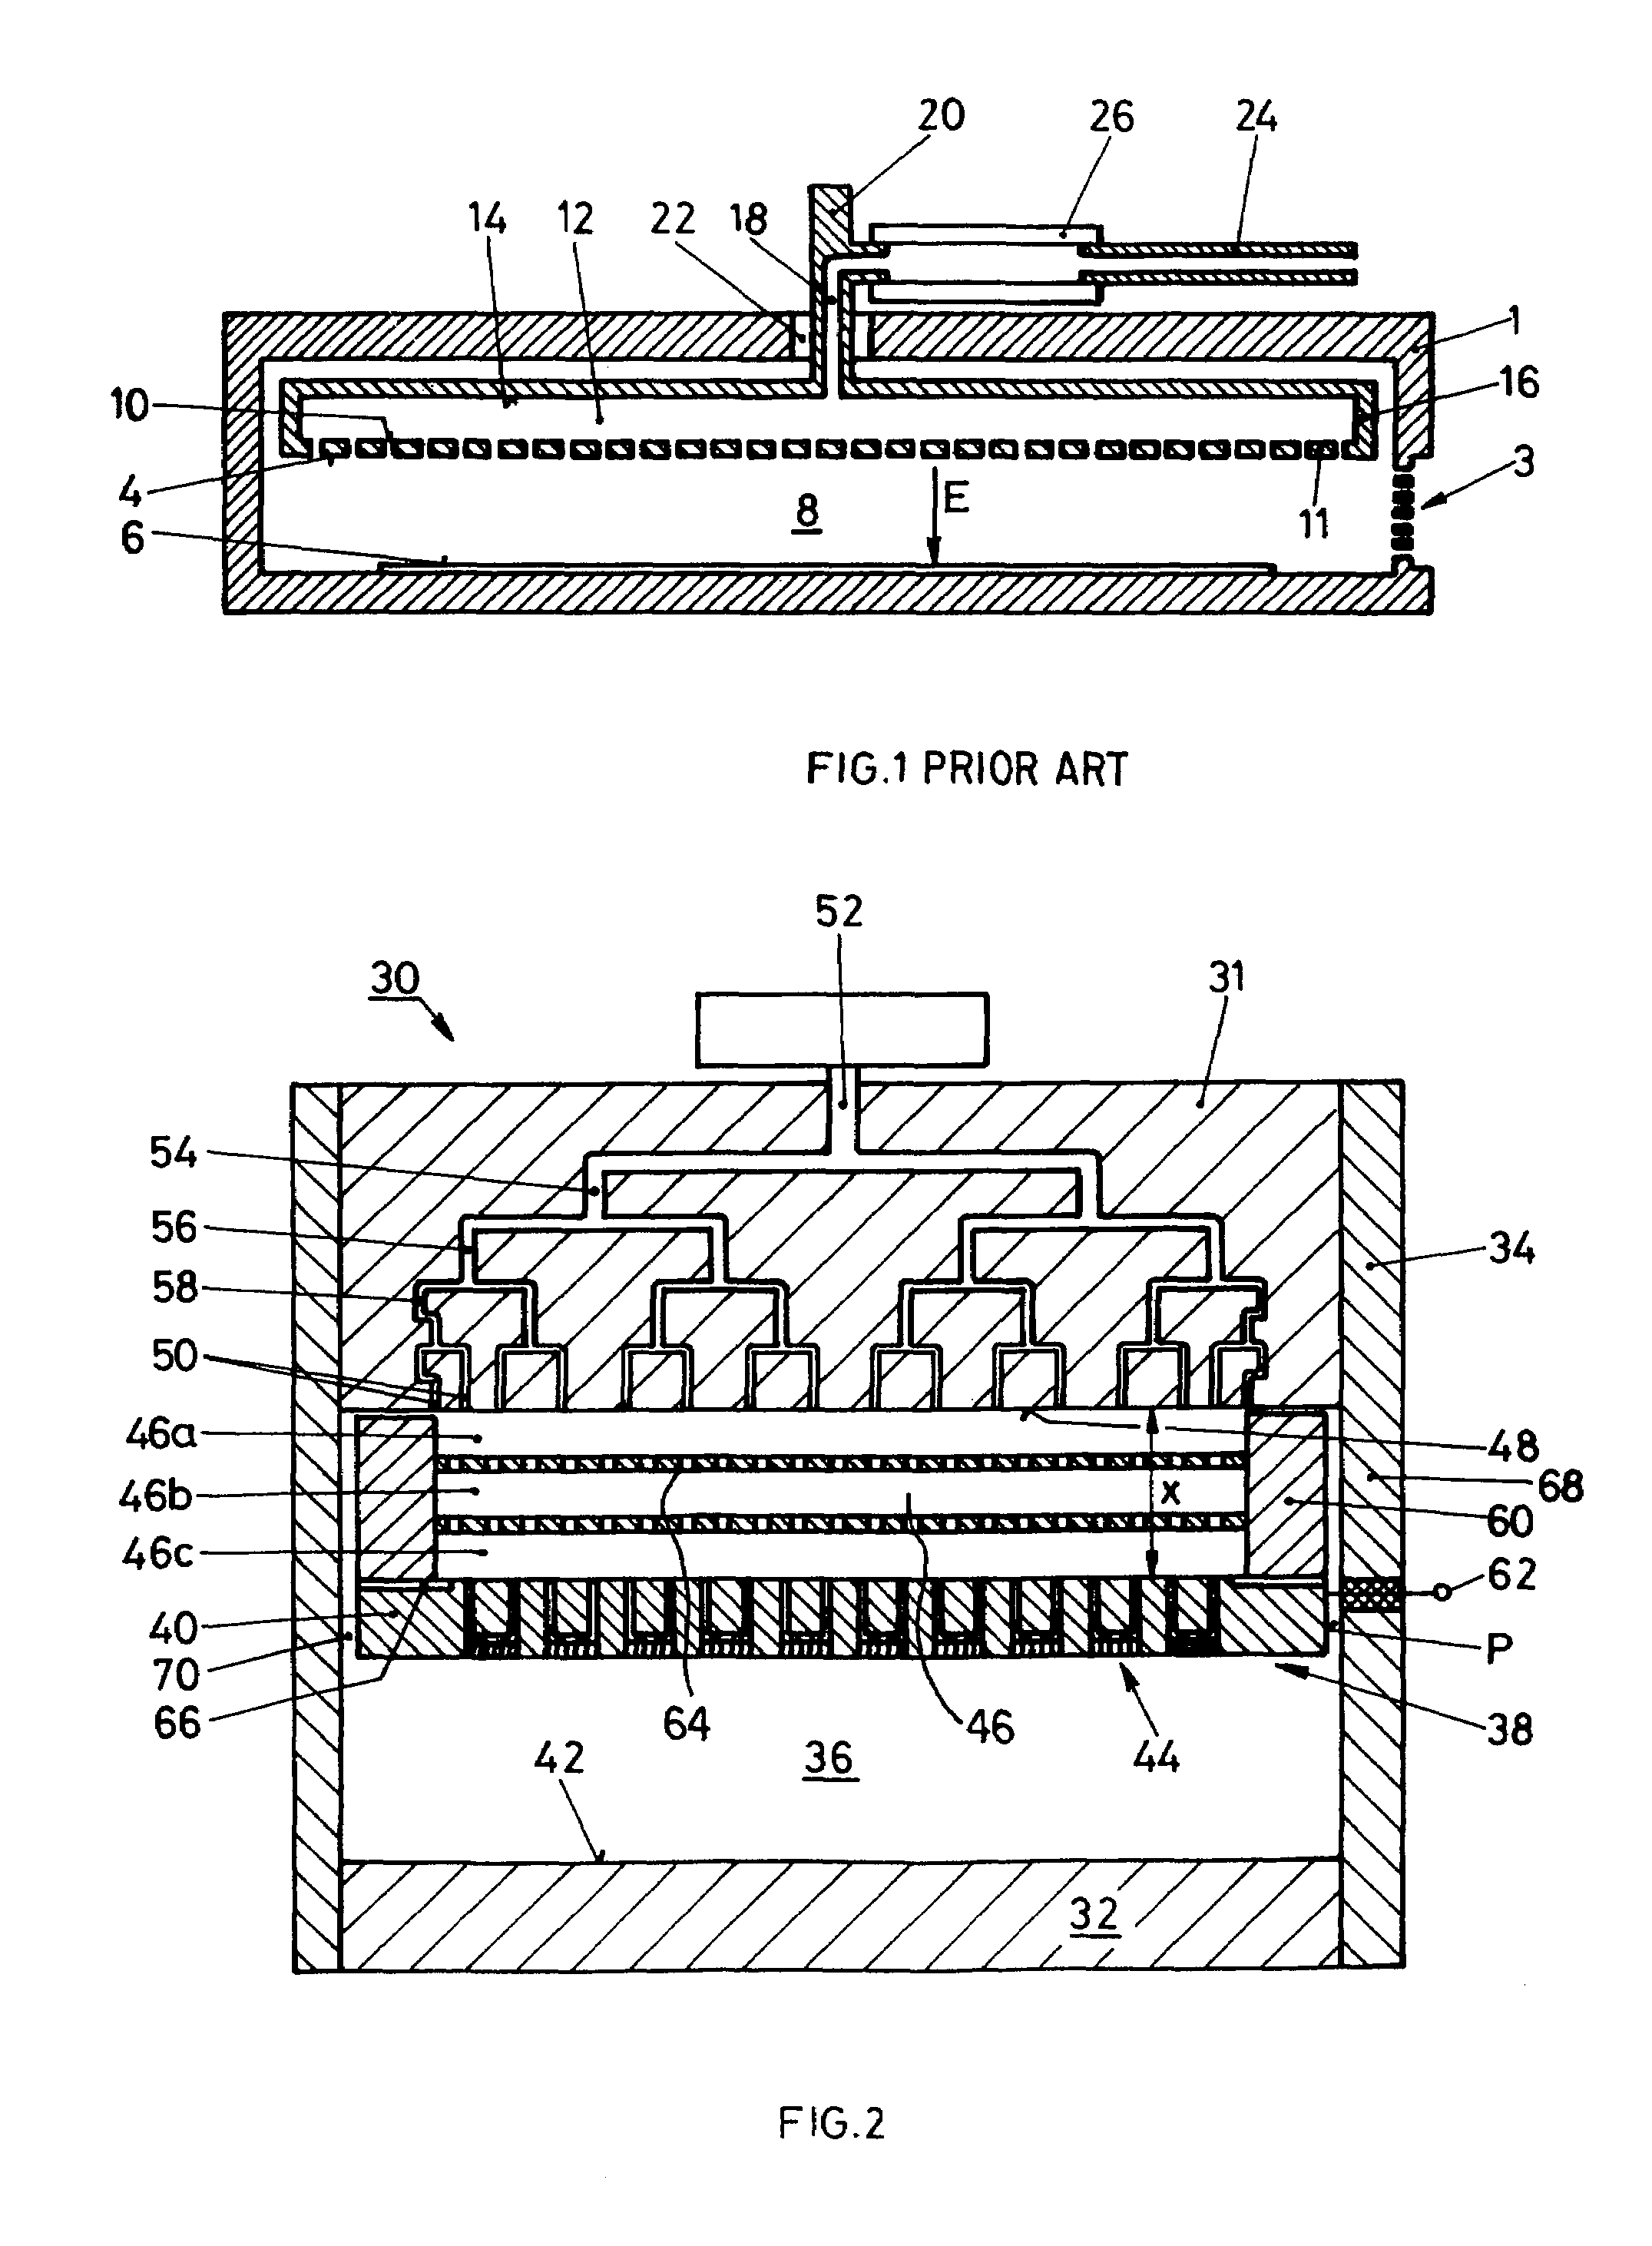 RF plasma reactor having a distribution chamber with at least one grid